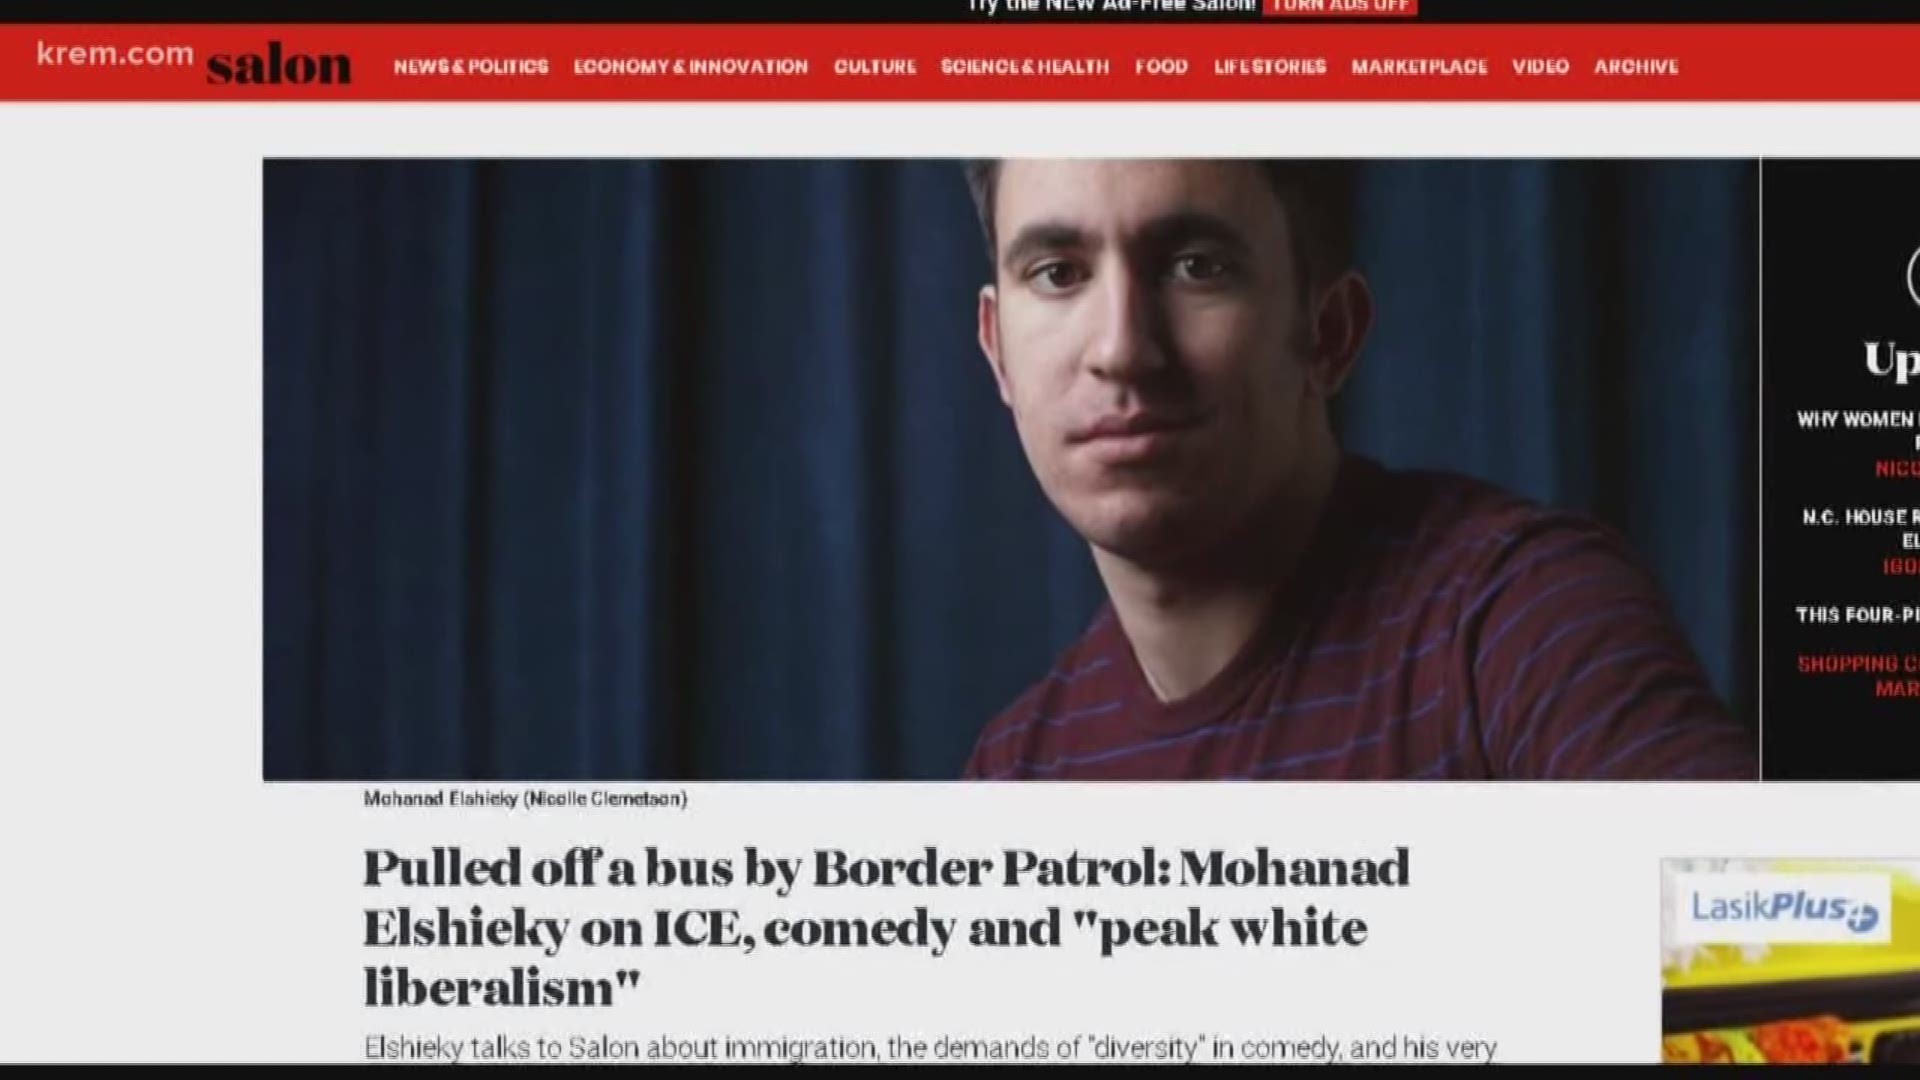 According to a U.S. Customs and Border Protection spokesperson, comedian Mohanad Elshieky was asked for his documents and the two he showed were not considered legal for verifying his asylum seeker status.